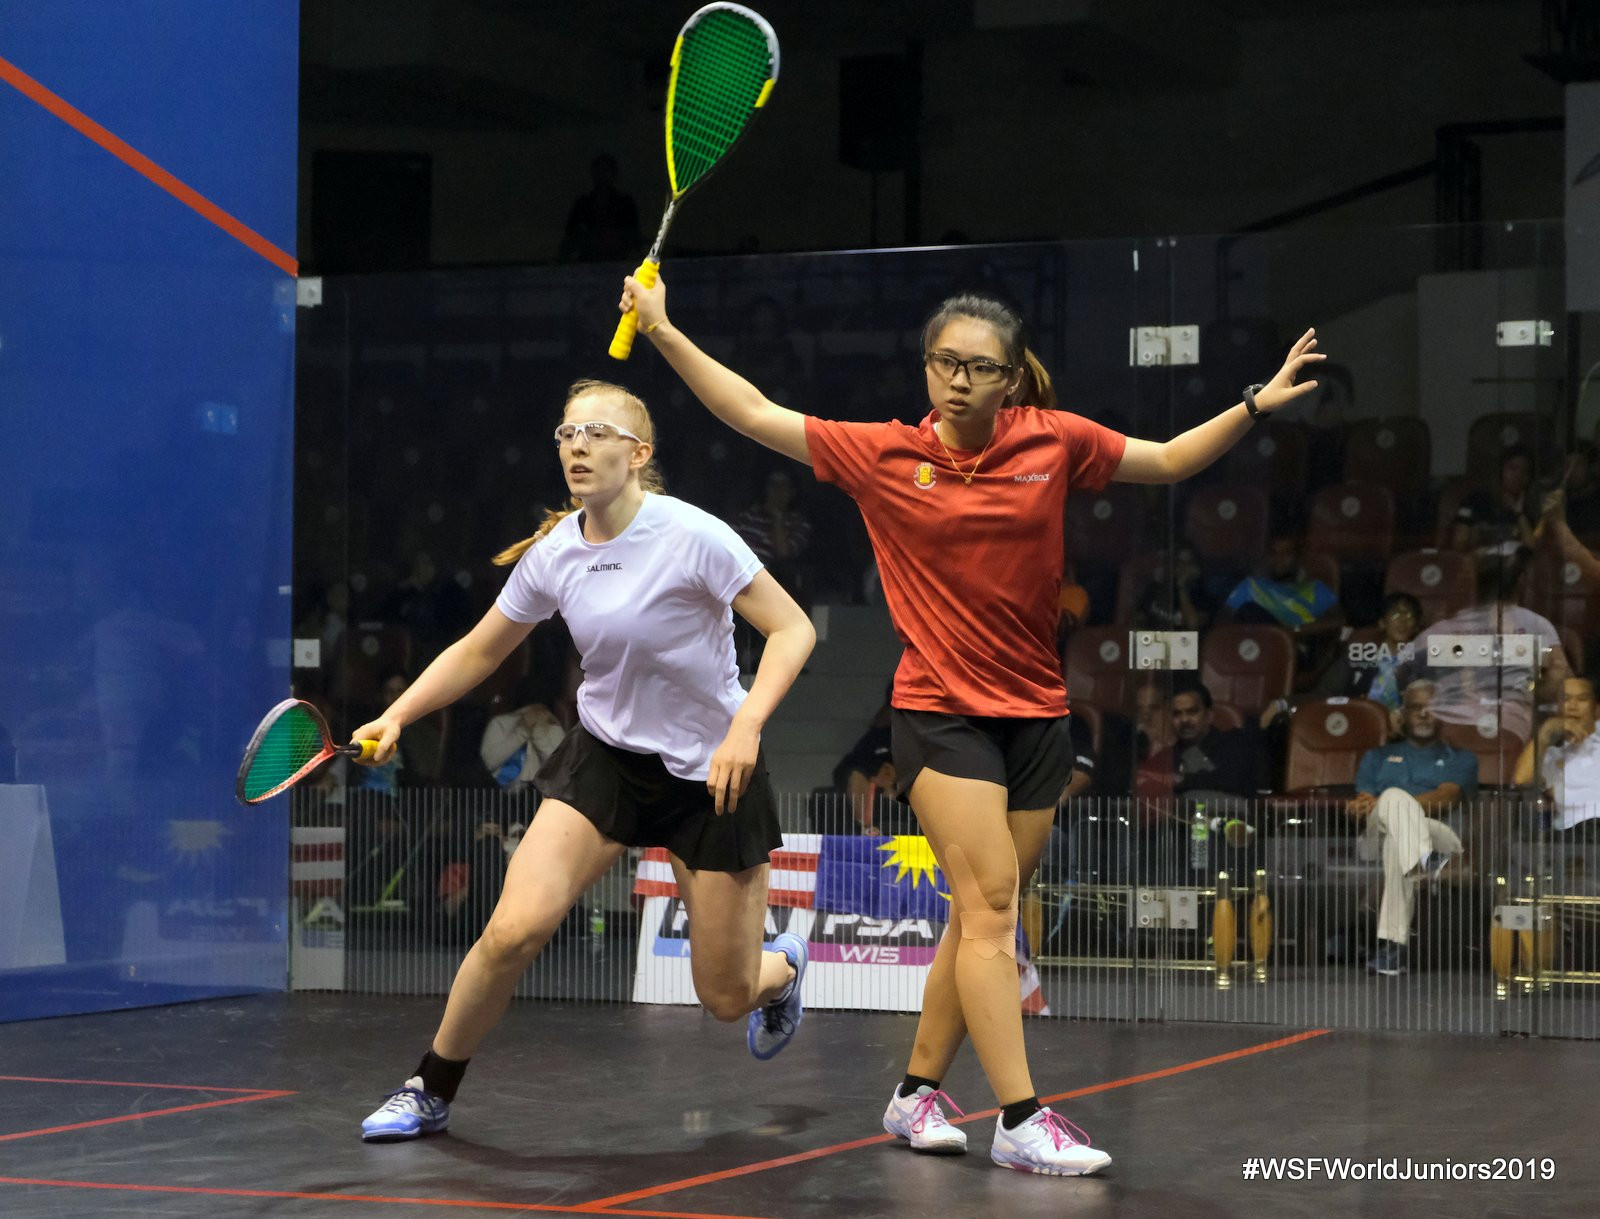 Top four seeds all victorious in World Junior Team Squash Championship quarter-finals